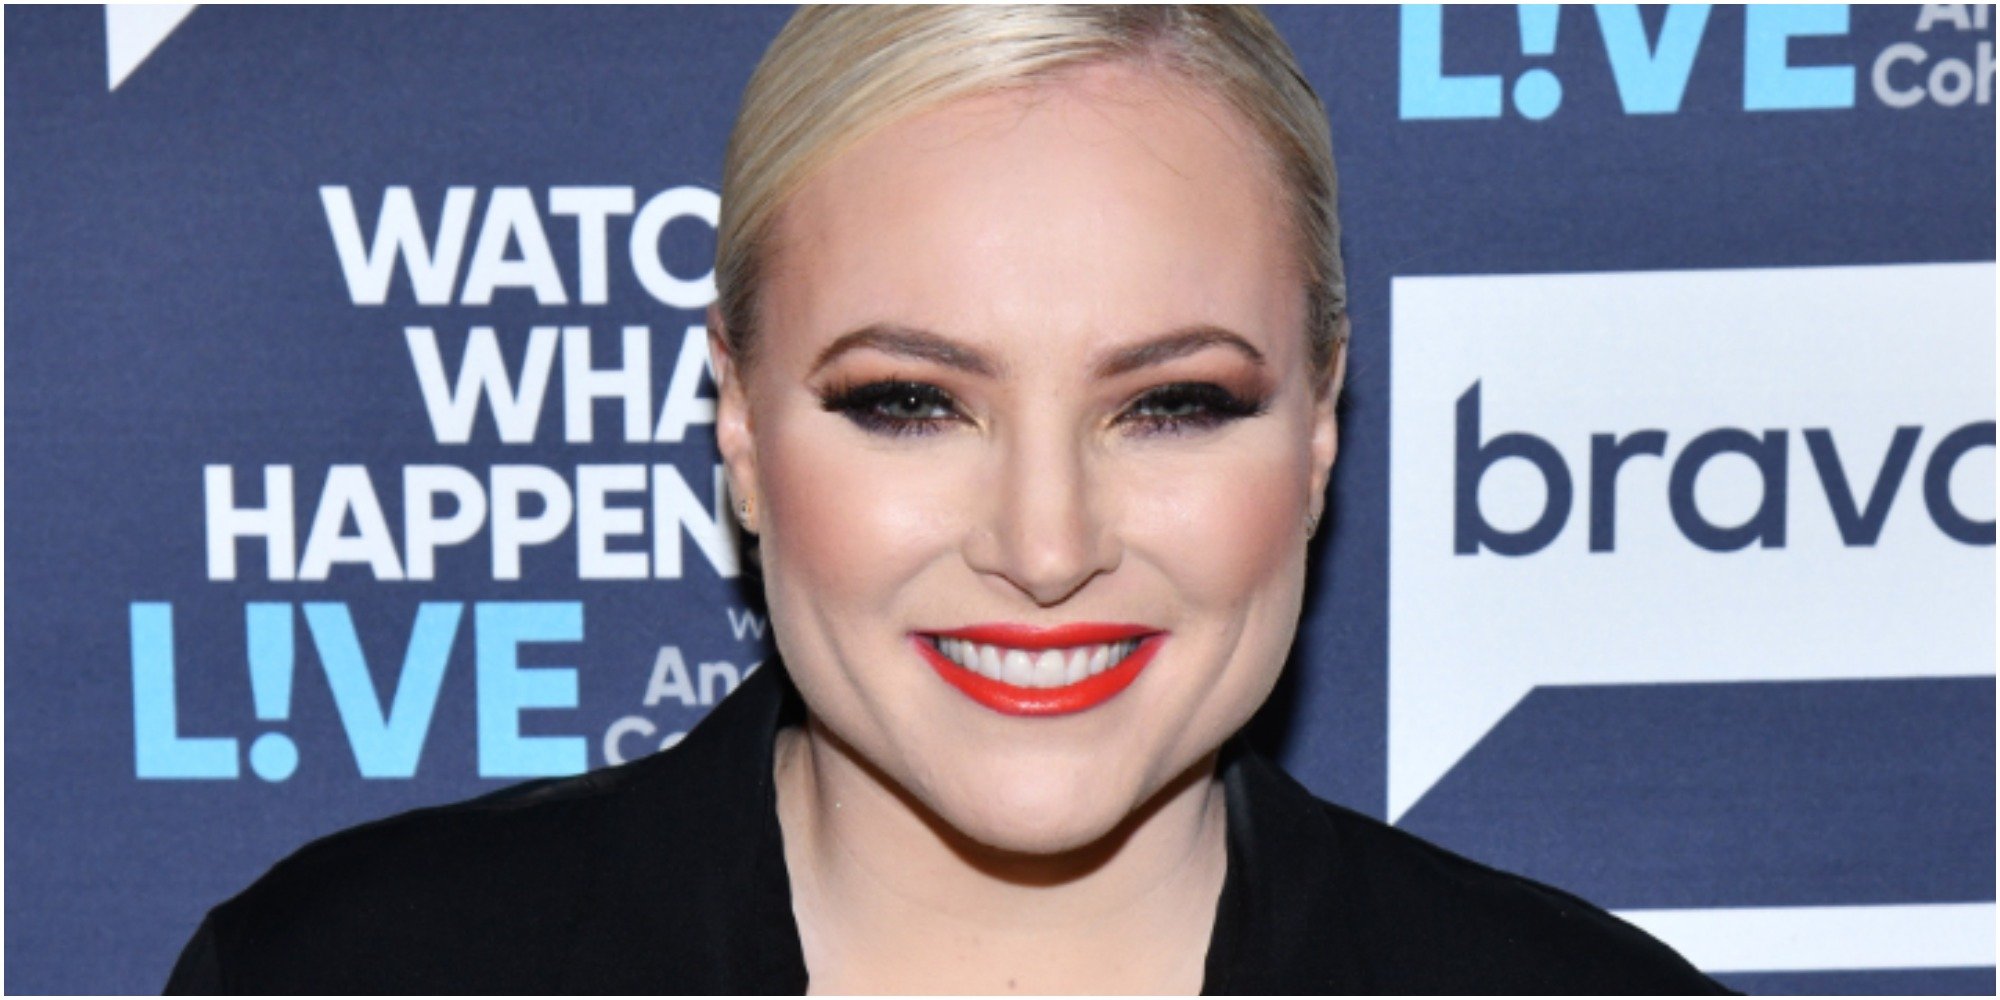 Meghan McCain’s ‘Irrational’ Thoughts After Daughter’s Birth Stemmed From Postpartum Anxiety